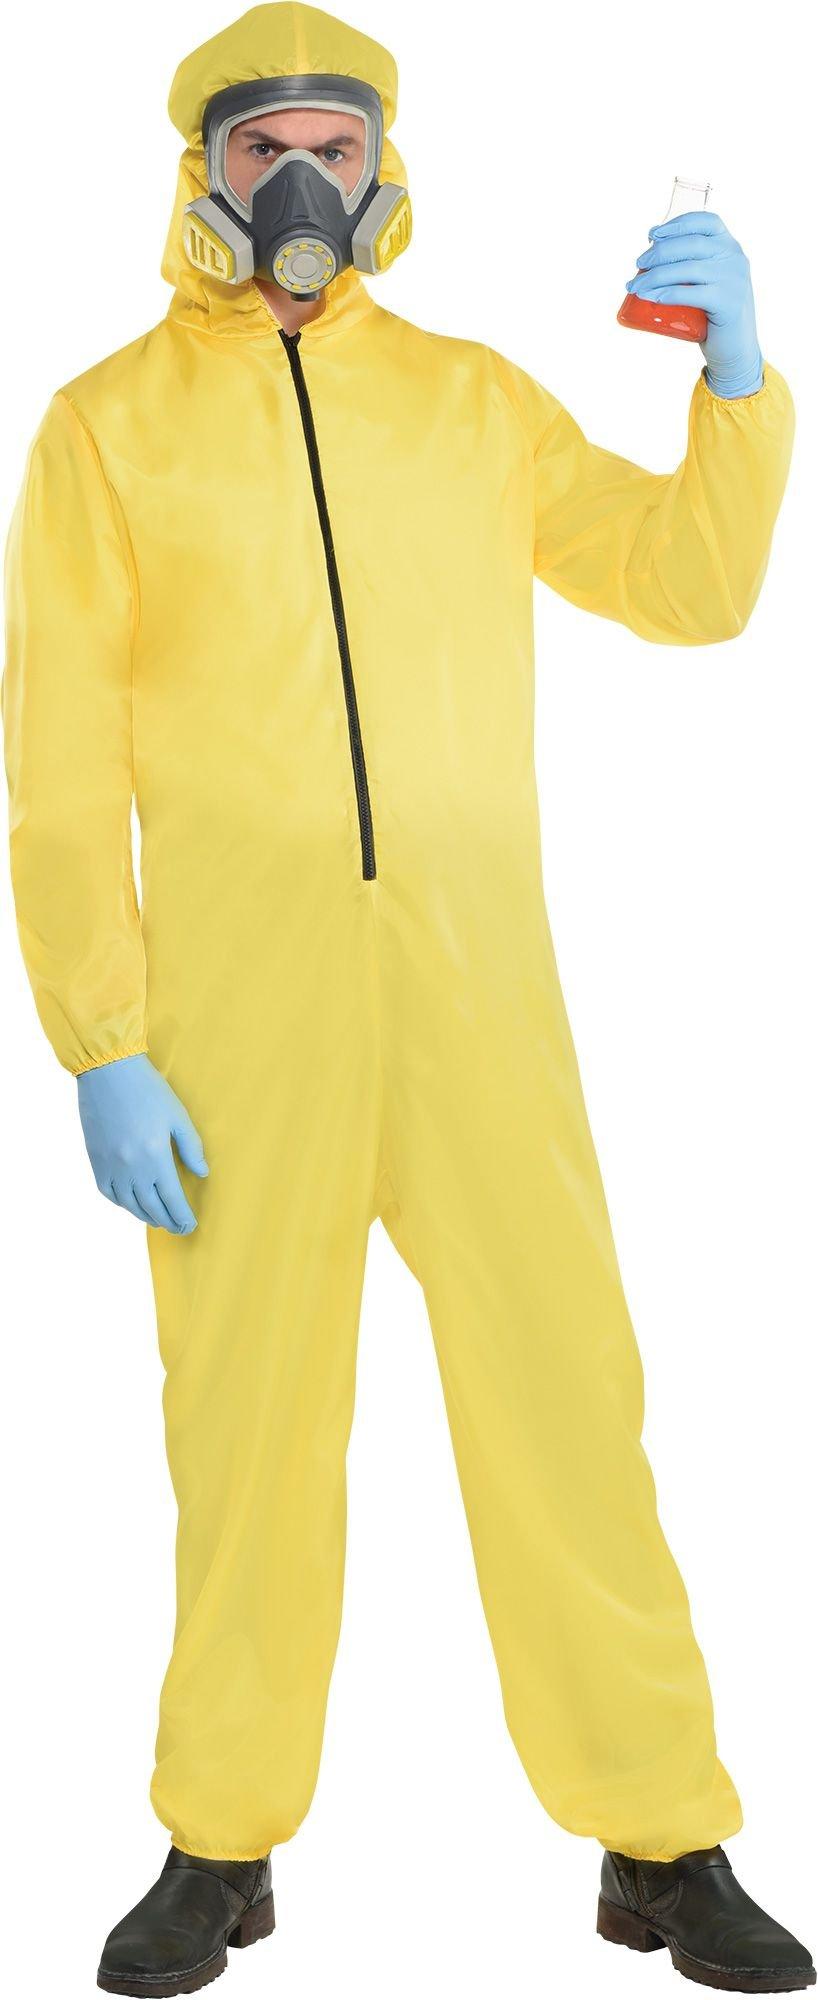 Nuclear Hazmat Suit Costume for Adults. Express delivery